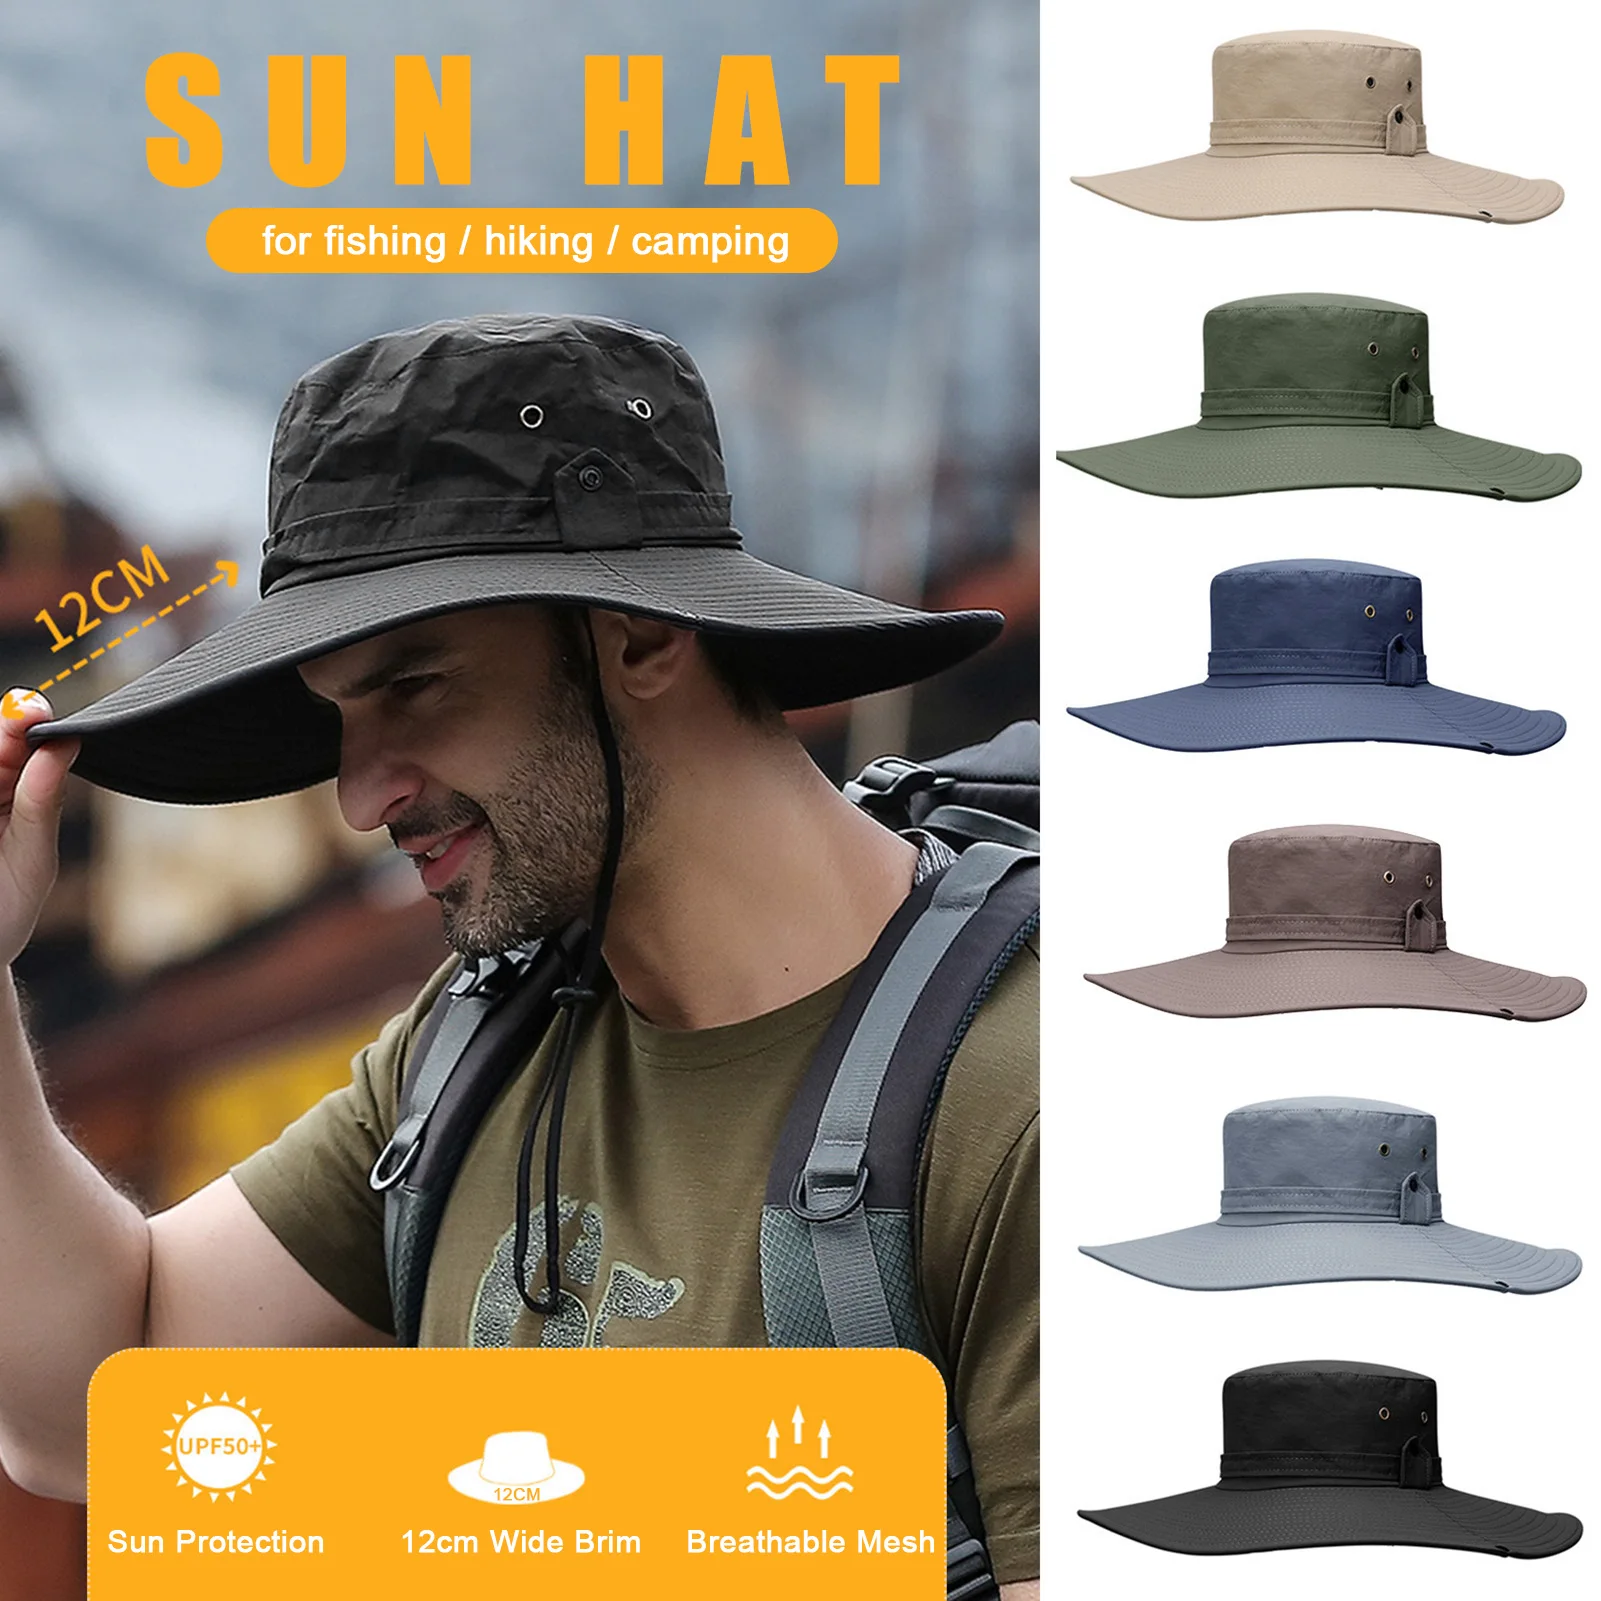 xixi-home Mens Sun Hat UV Protection Bucket Hat Outdoor Wide Brim Sun  Fishing Hat for Men,Breathable Foldable Climbing Hat with Adjustable Chin